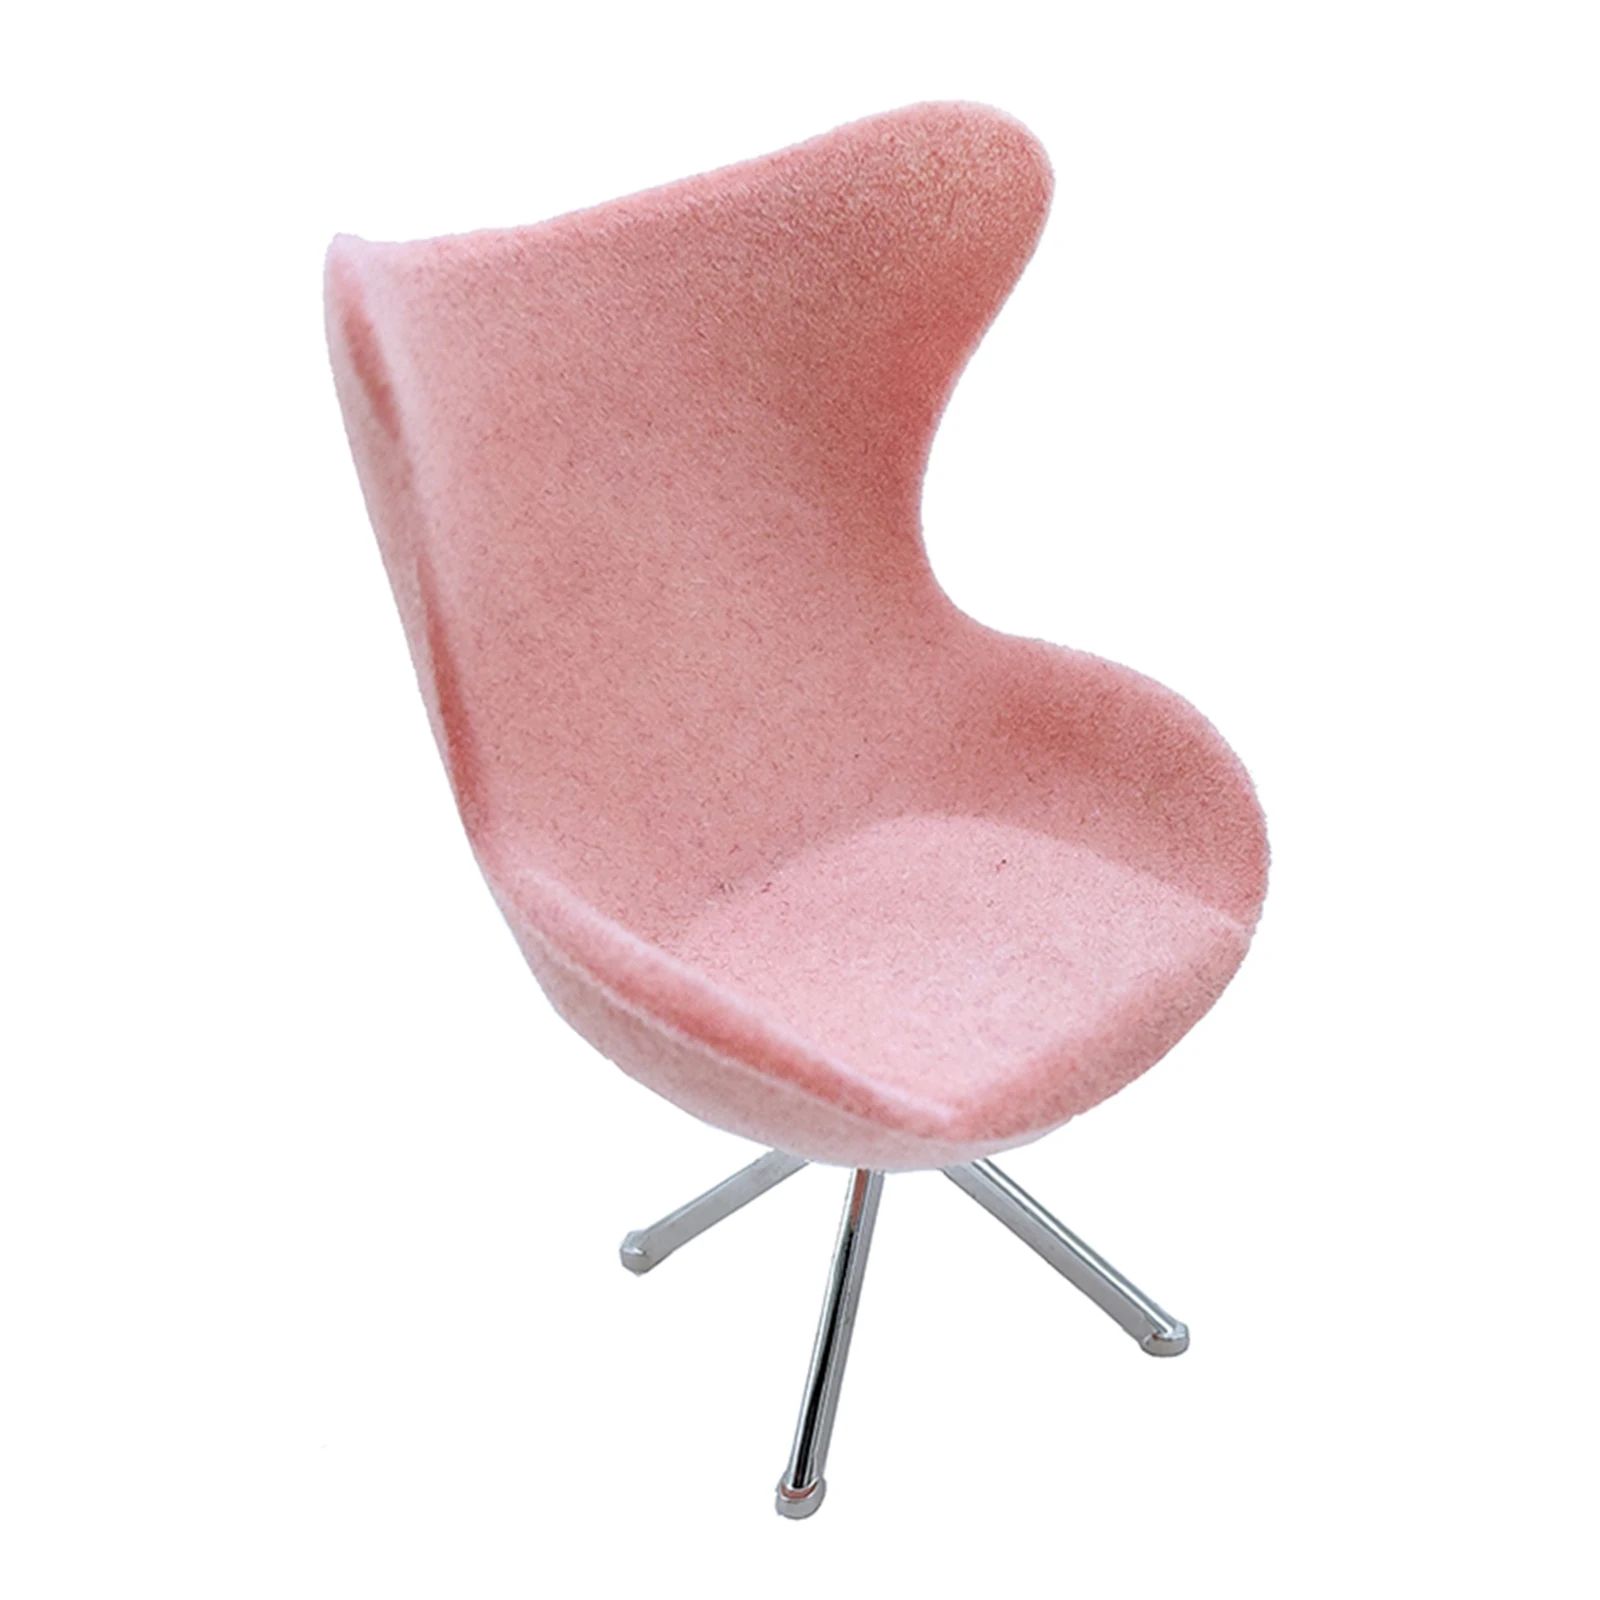 Modern Pink Office High Back Swan Chair Living Room Furniture Toy 1/12 Scale